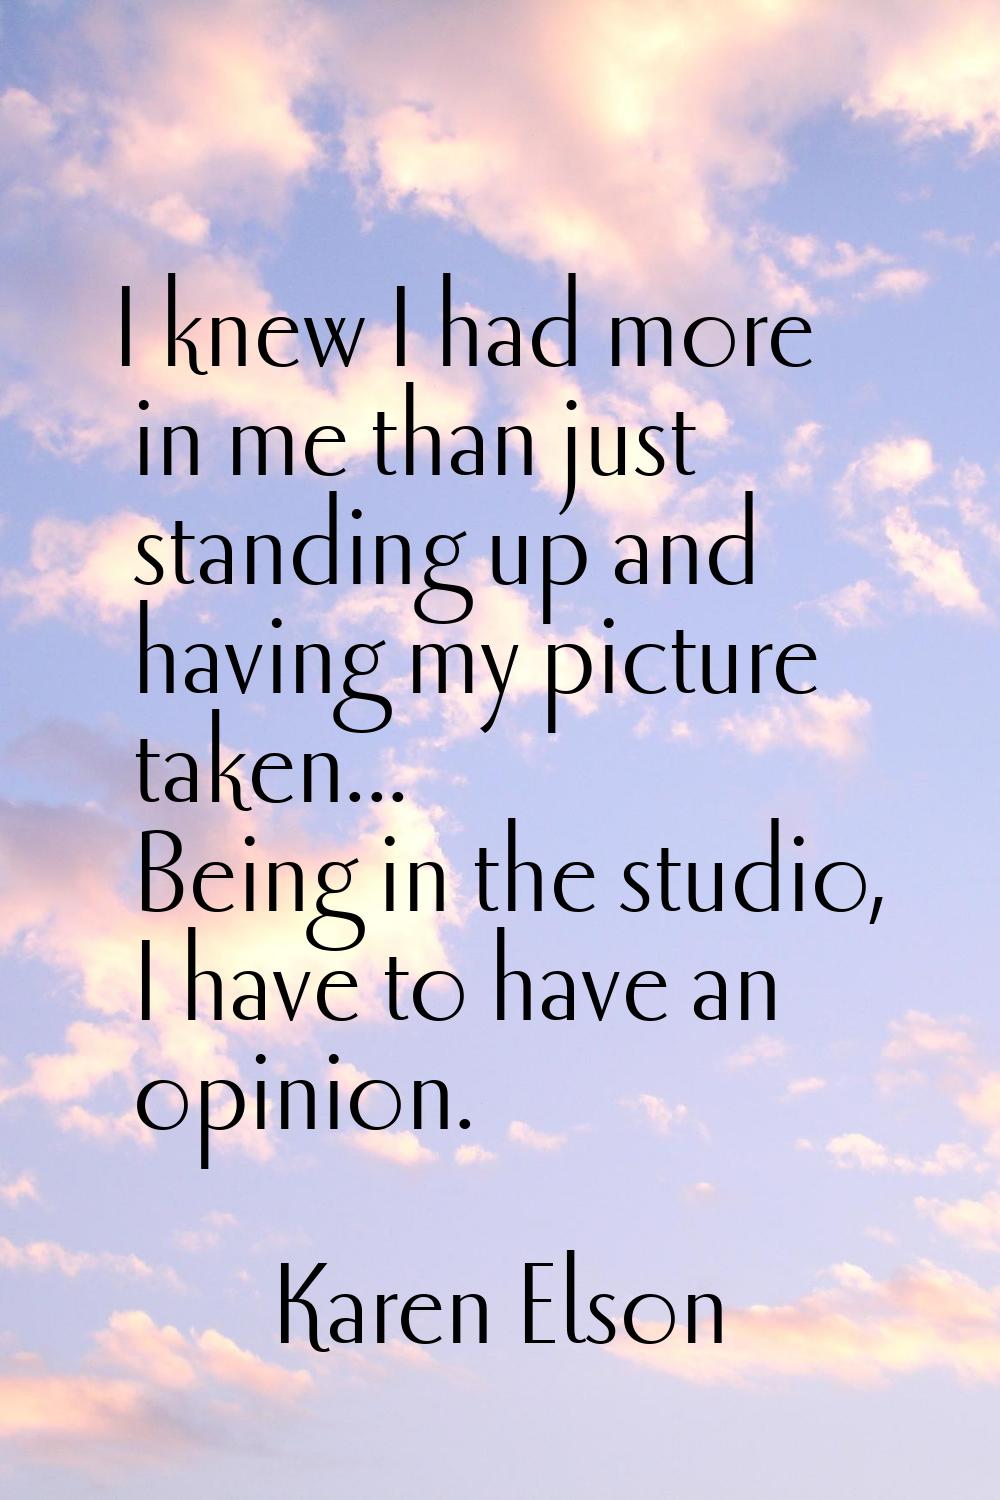 I knew I had more in me than just standing up and having my picture taken... Being in the studio, I